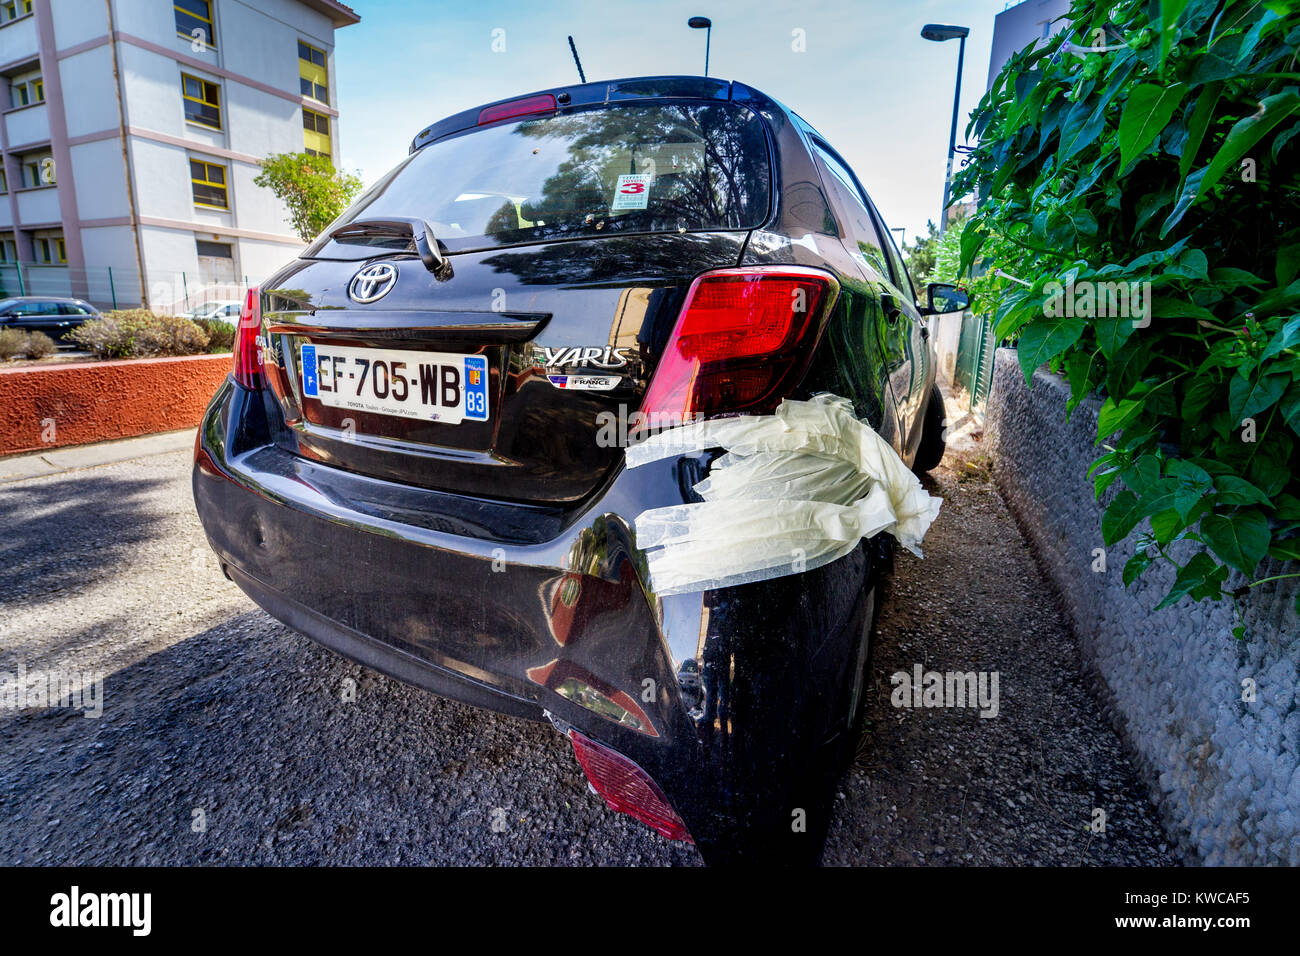 Toulon, France, August 20, 2017: damaged rear bumper repaired with paper tape Stock Photo